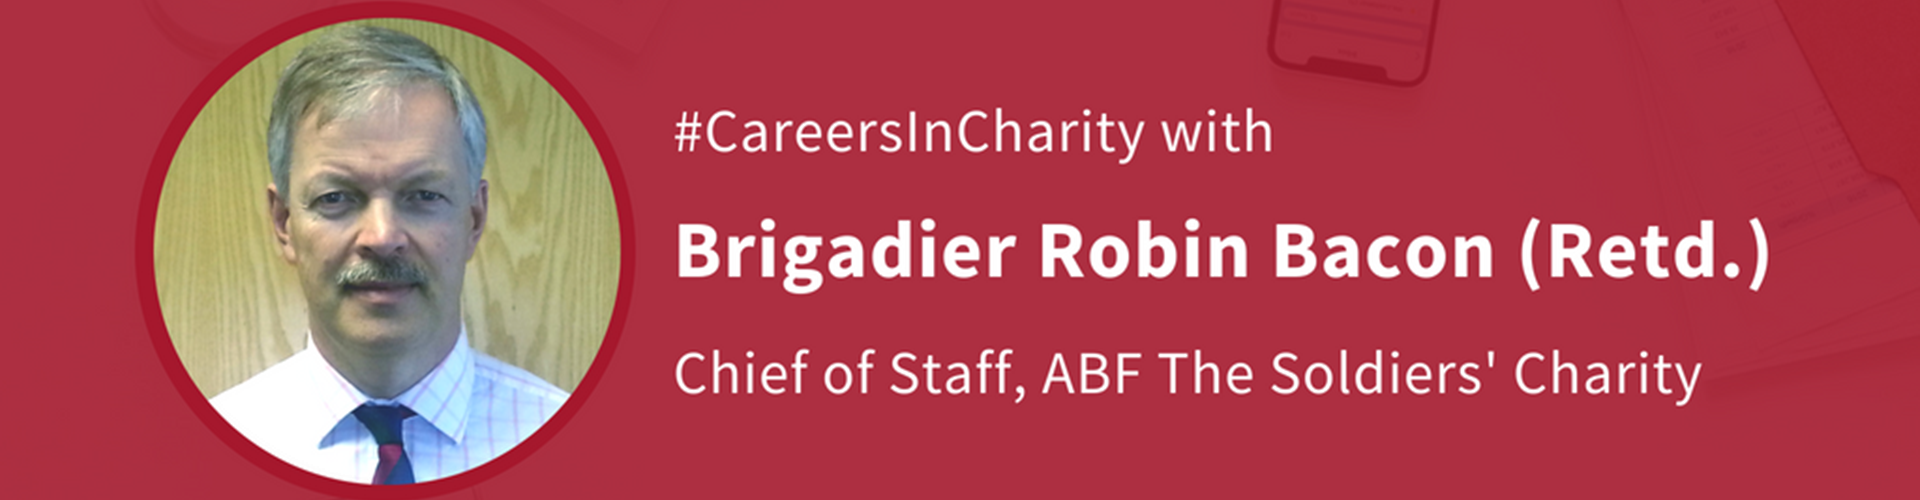 #CareersInCharity: An Interview with Brigadier Robin Bacon (Retd.), Chief of Staff at ABF The Soldiers’ Charity